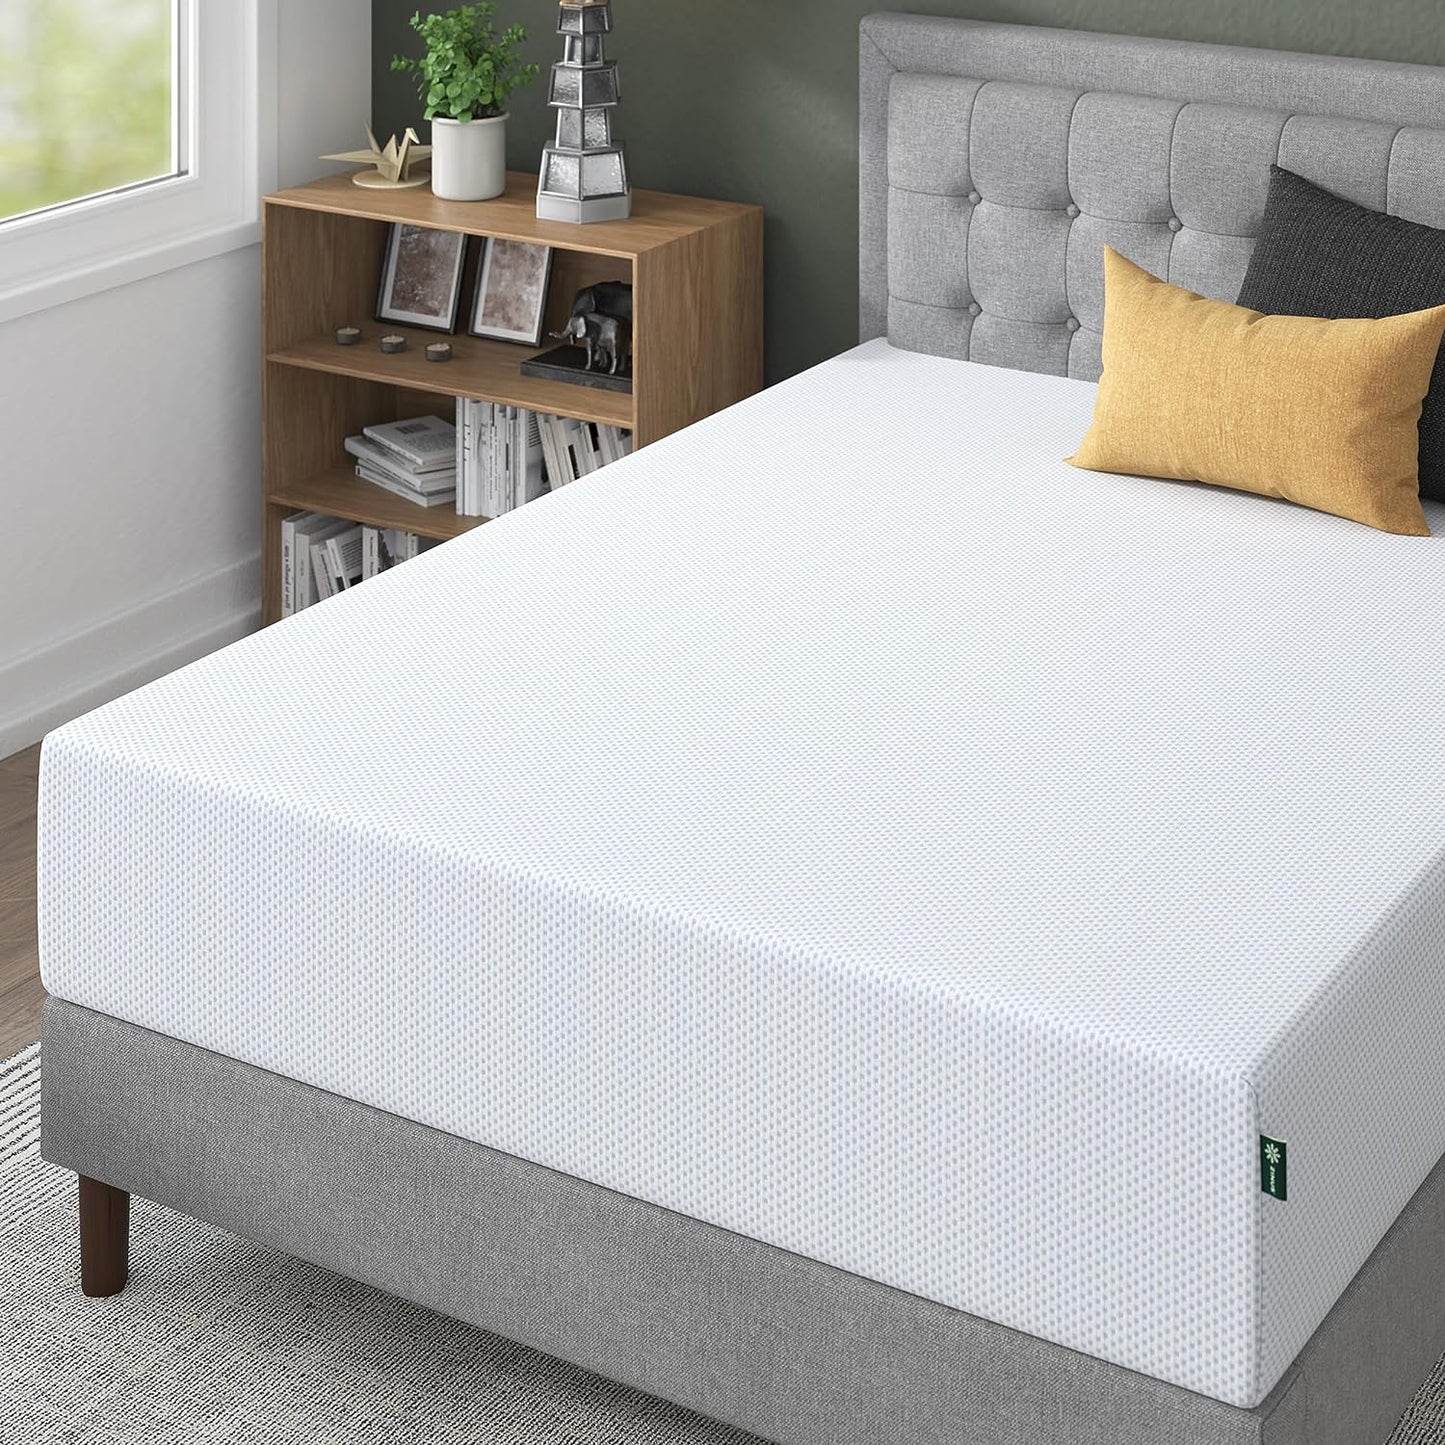 NEW - ZINUS 12 Inch Green Tea Cooling Gel Memory Foam Mattress / Cooling Gel Foam / Pressure Relieving / CertiPUR-US Certified / Bed-in-a-Box, Twin White - Retail $232